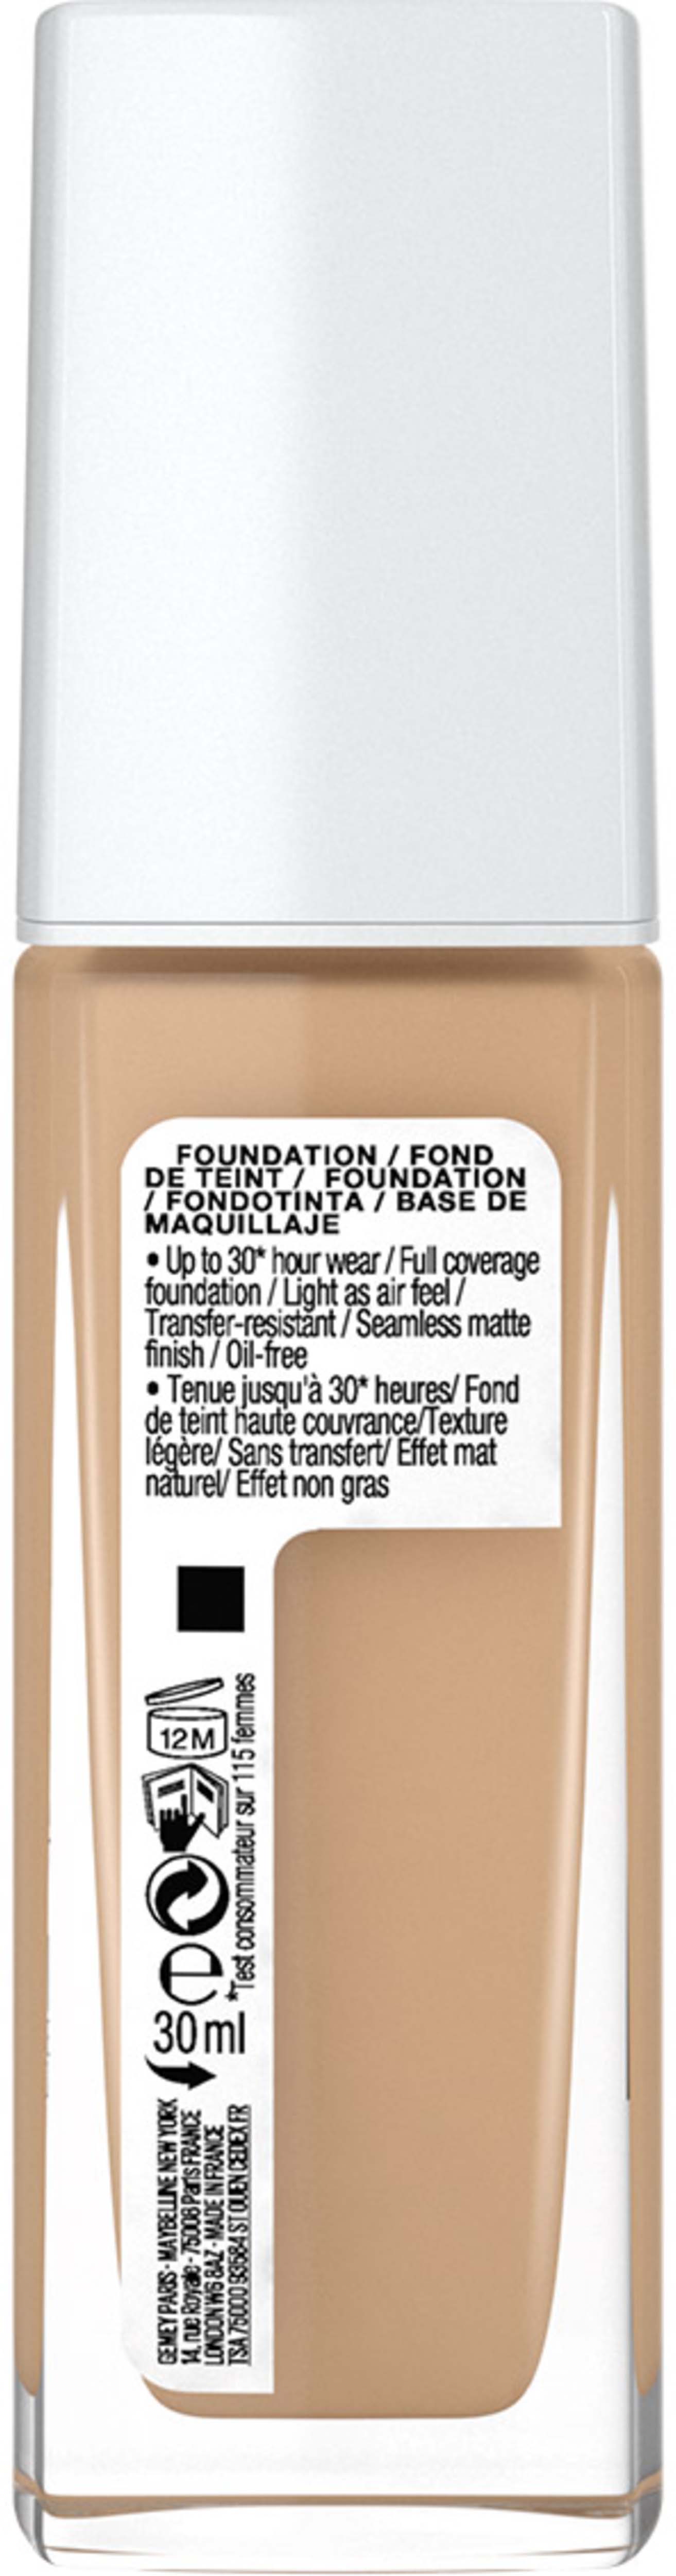 Warm foundation nude 31 Wear Active Maybelline New York Superstay